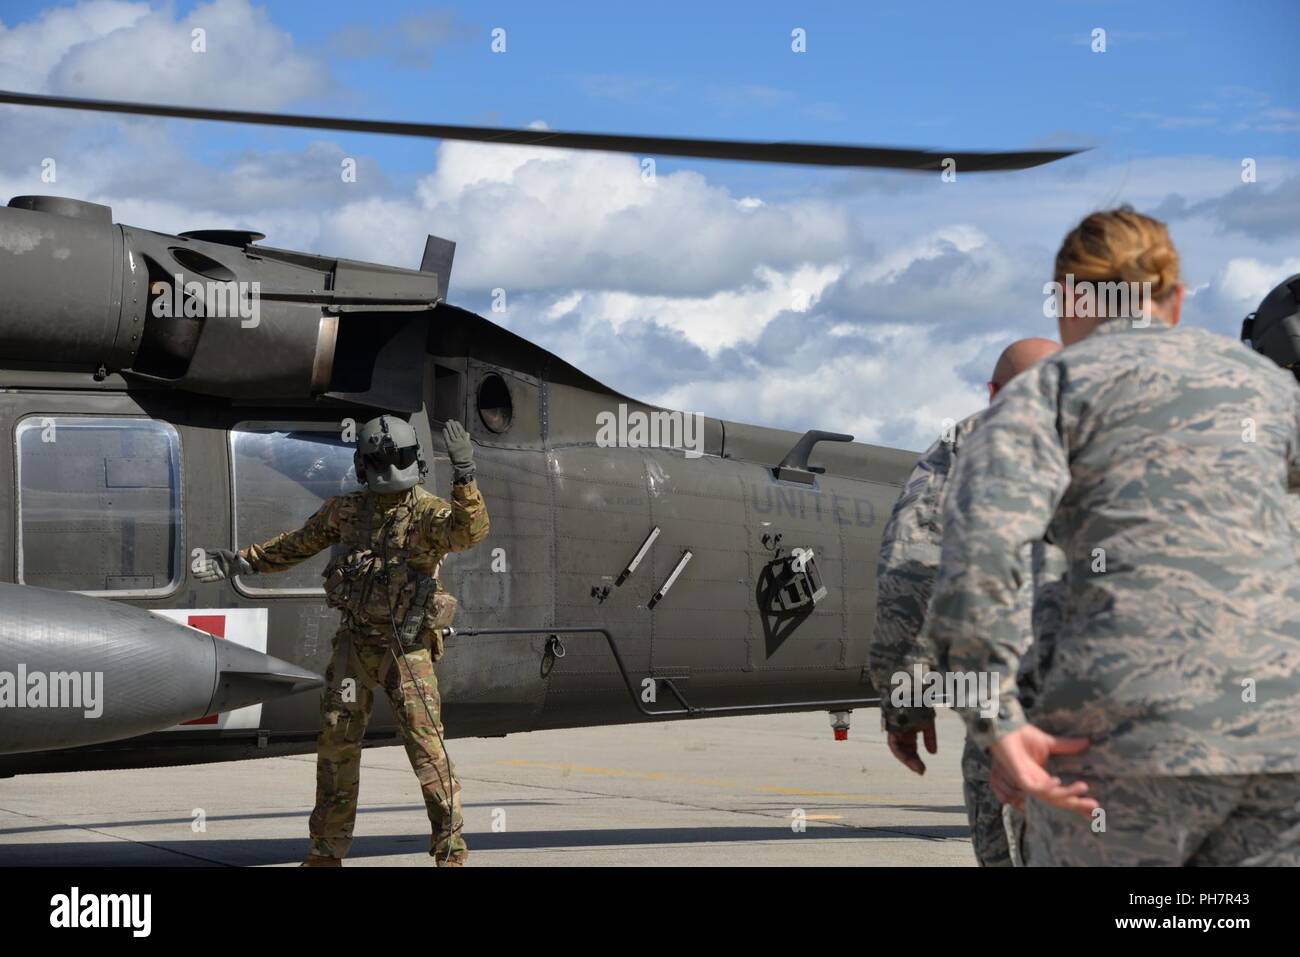 U.S. Army Sgt. Andrew Greenfield, helicopter mechanic with the 1st  Battalion, 52nd Aviation Regiment, supervises a medivac drill during joint  force Air Force and Army medical training at Fort Wainwright, Alaska June